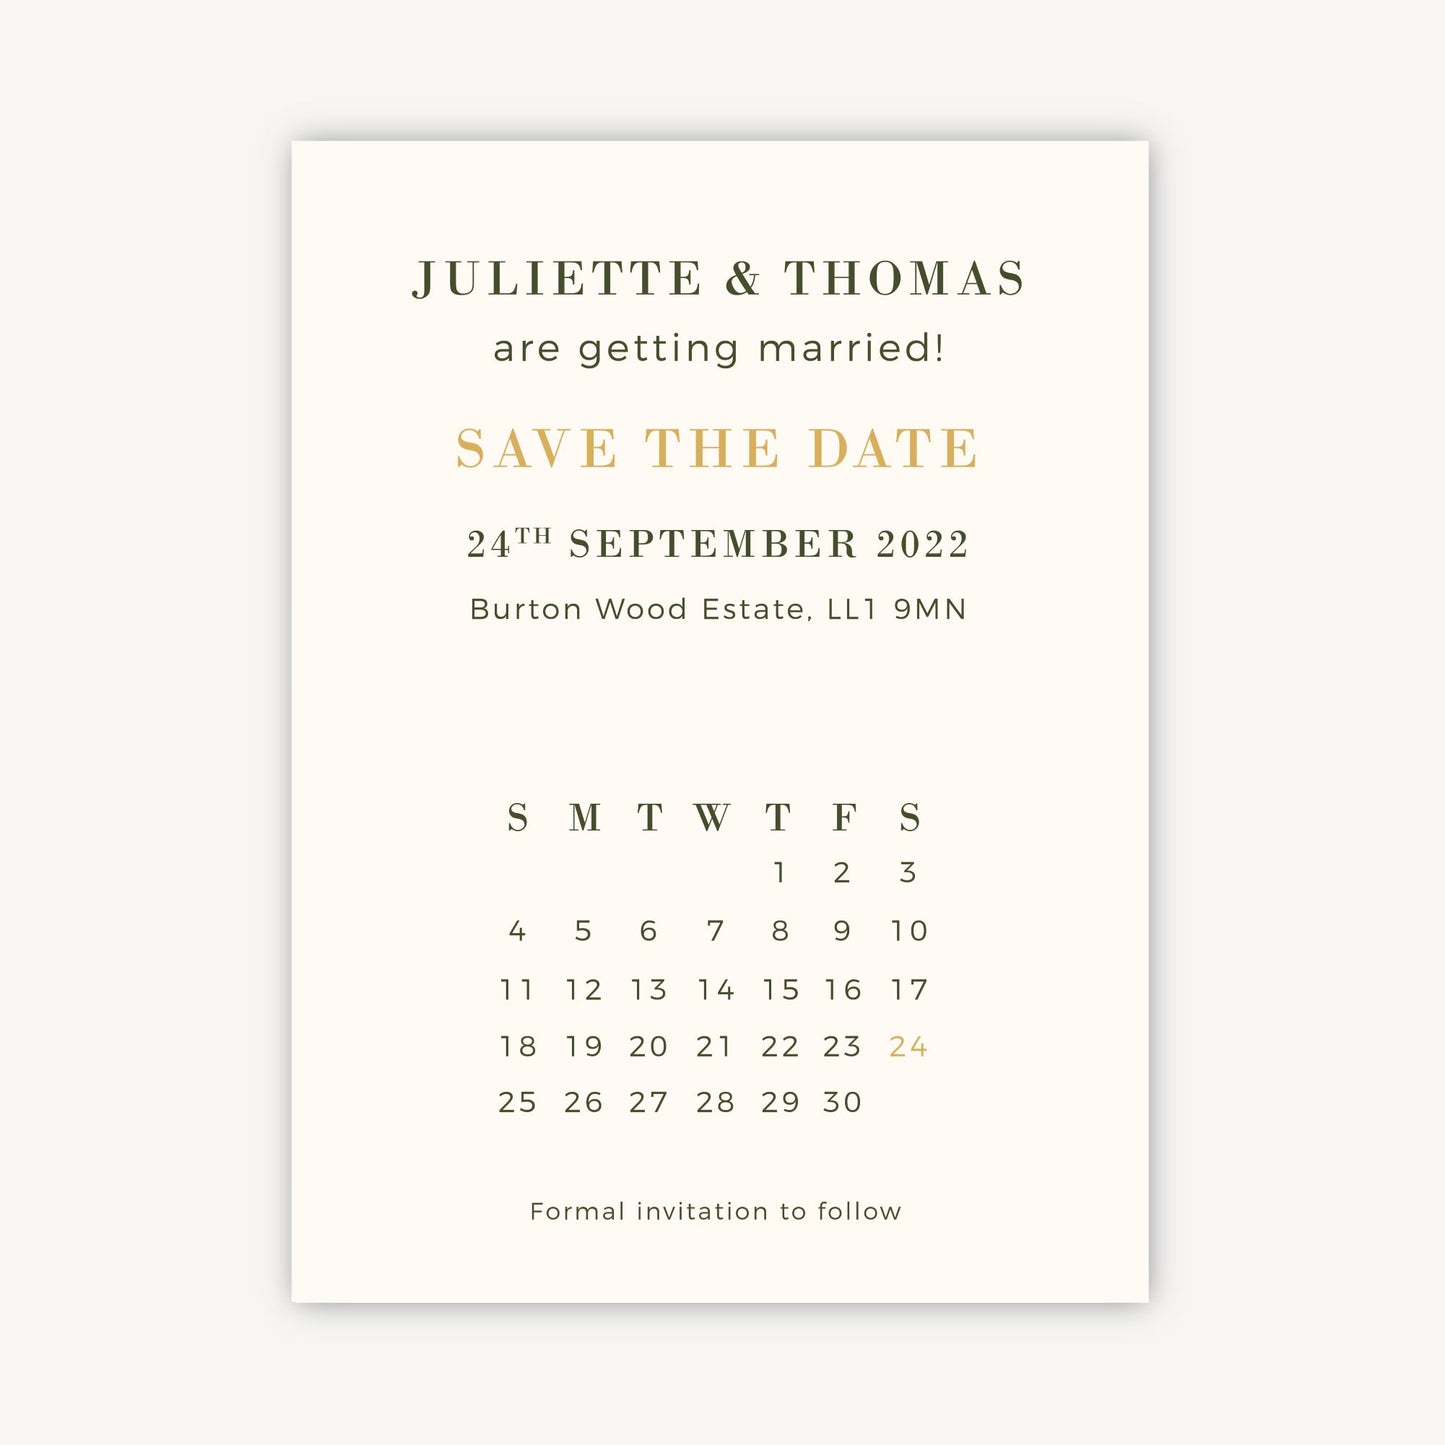 Rustic Wildflowers Folded Wedding Save the Date